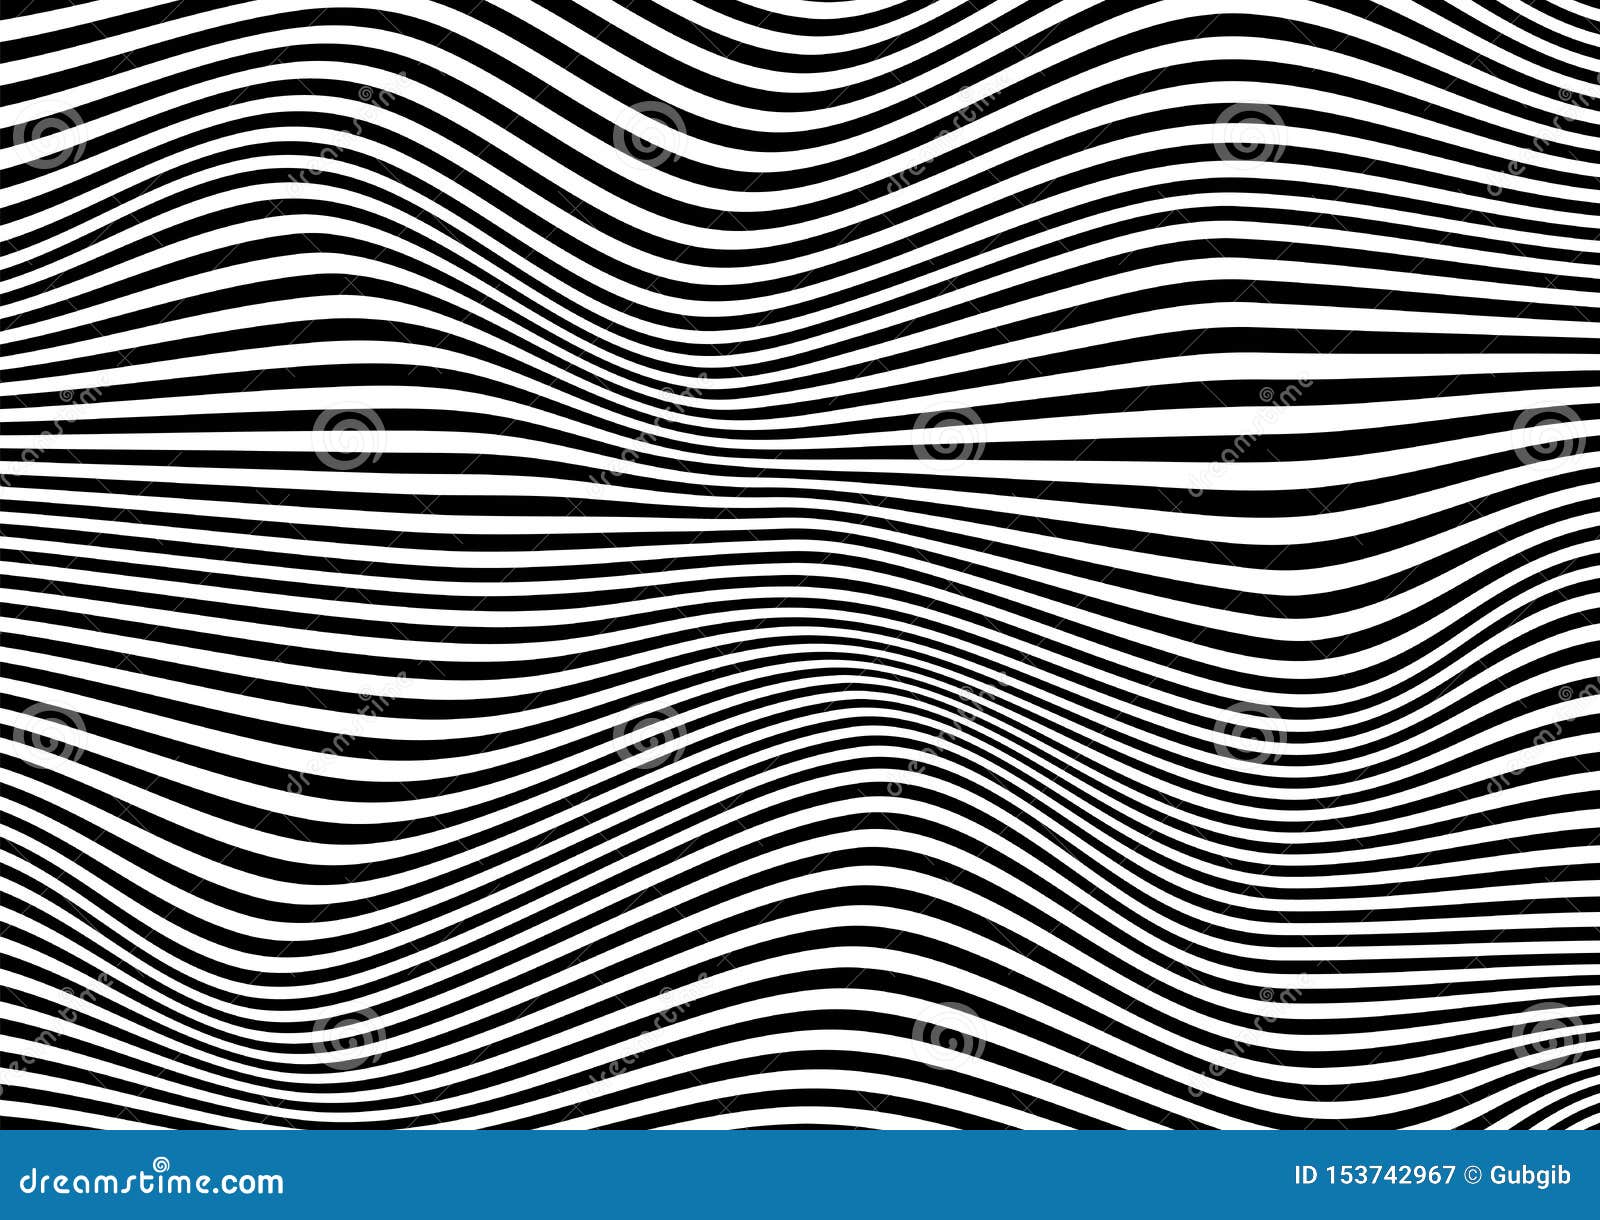 Abstract Background In Black And White With Wavy Lines Pattern Stock